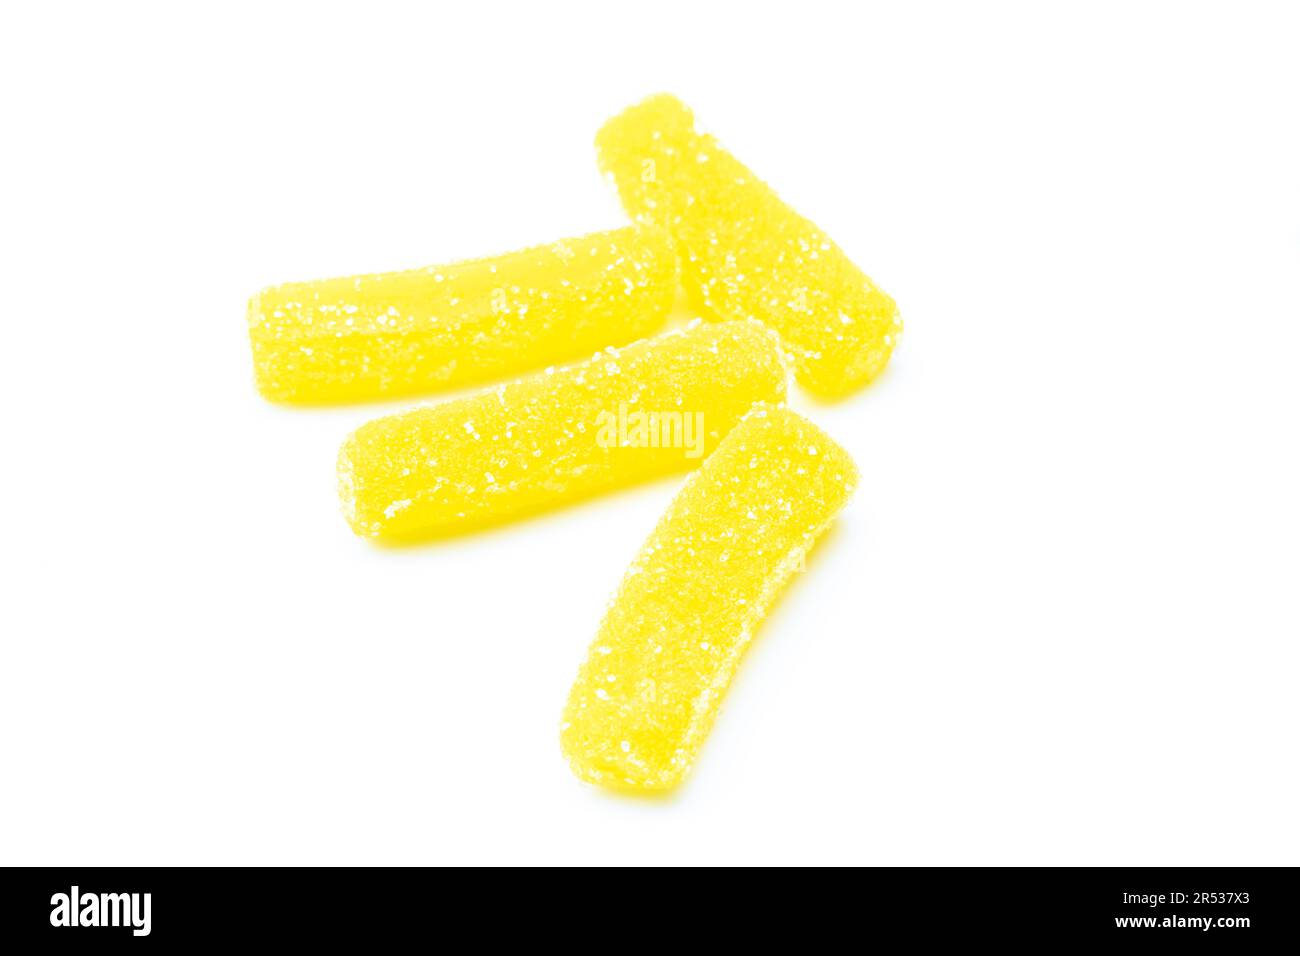 Pile of yellow sugary jelly candies isolated on white background. Gummy worms treat Stock Photo